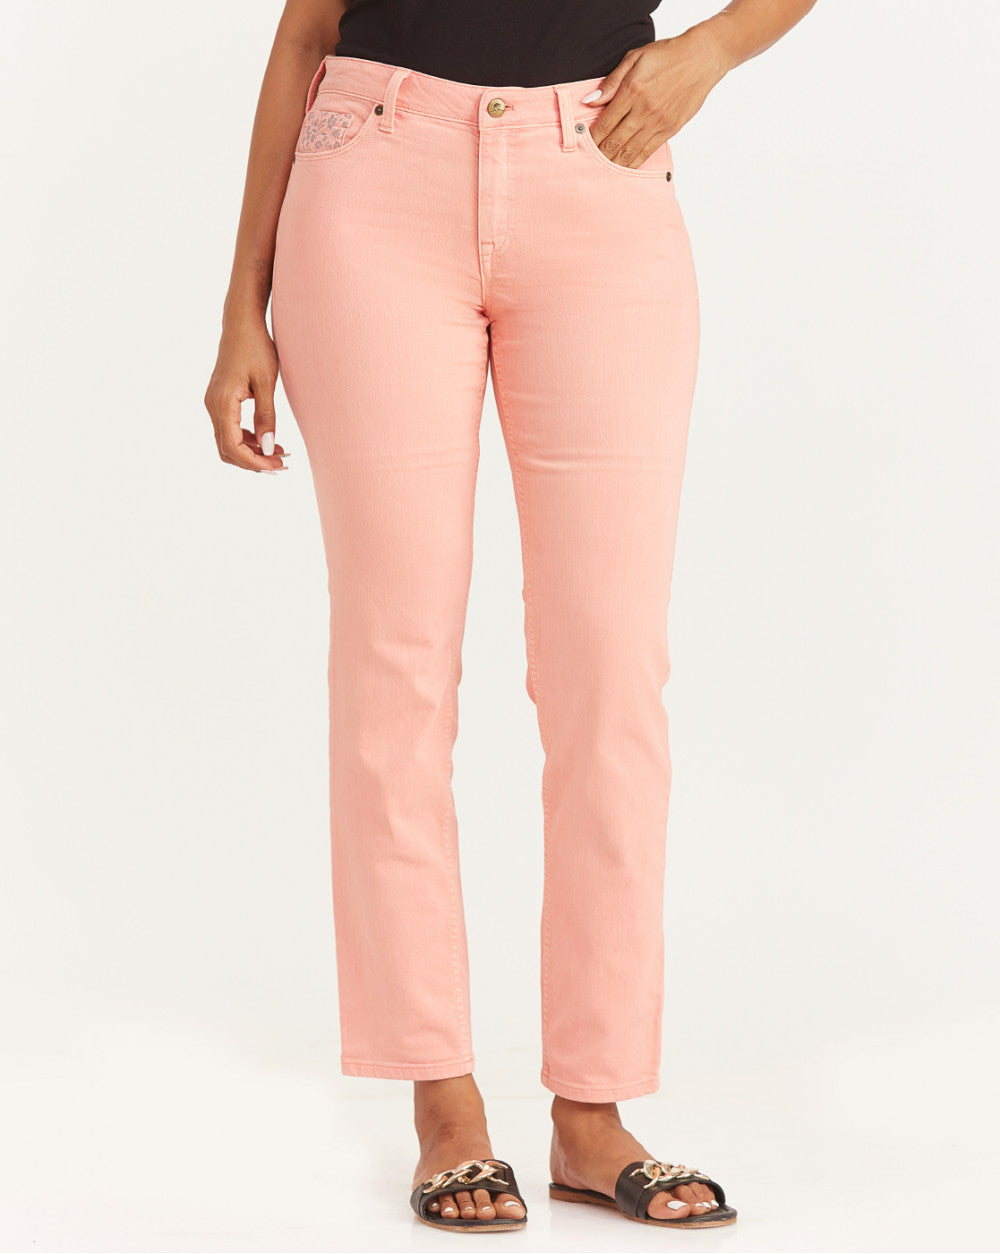 Slim Fit Mid Waist Colored Jeans - Coral